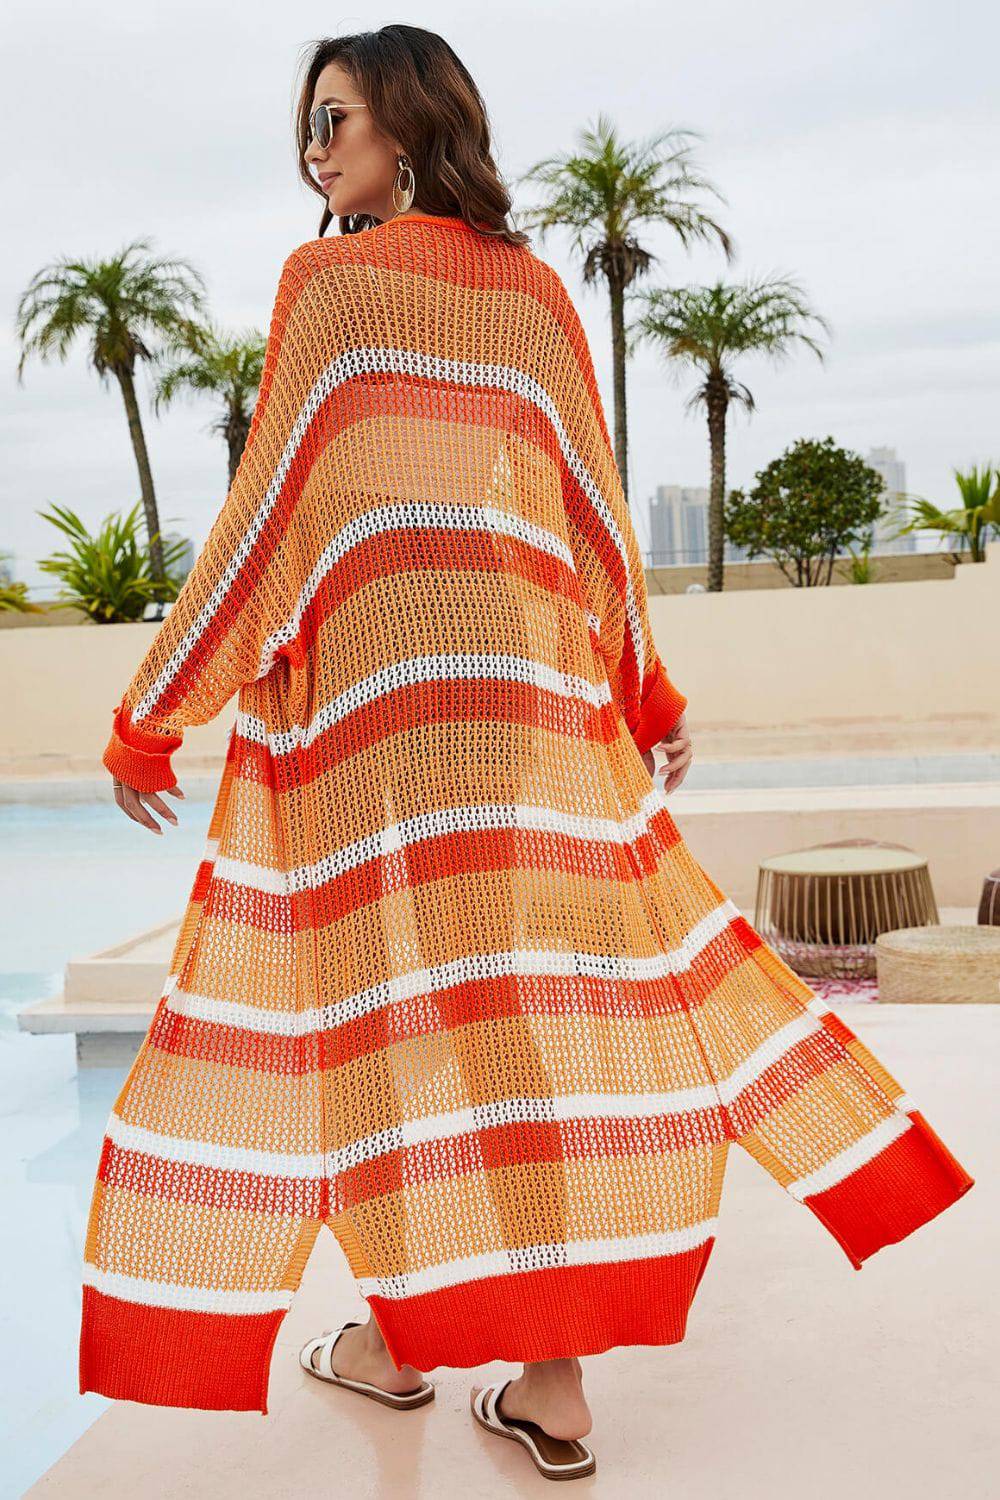 Enchantress of the Seas - Discover Romance and Elegance with Our Striped Duster Cover Up - Wrap Yourself in Timeless Beauty - Guy Christopher